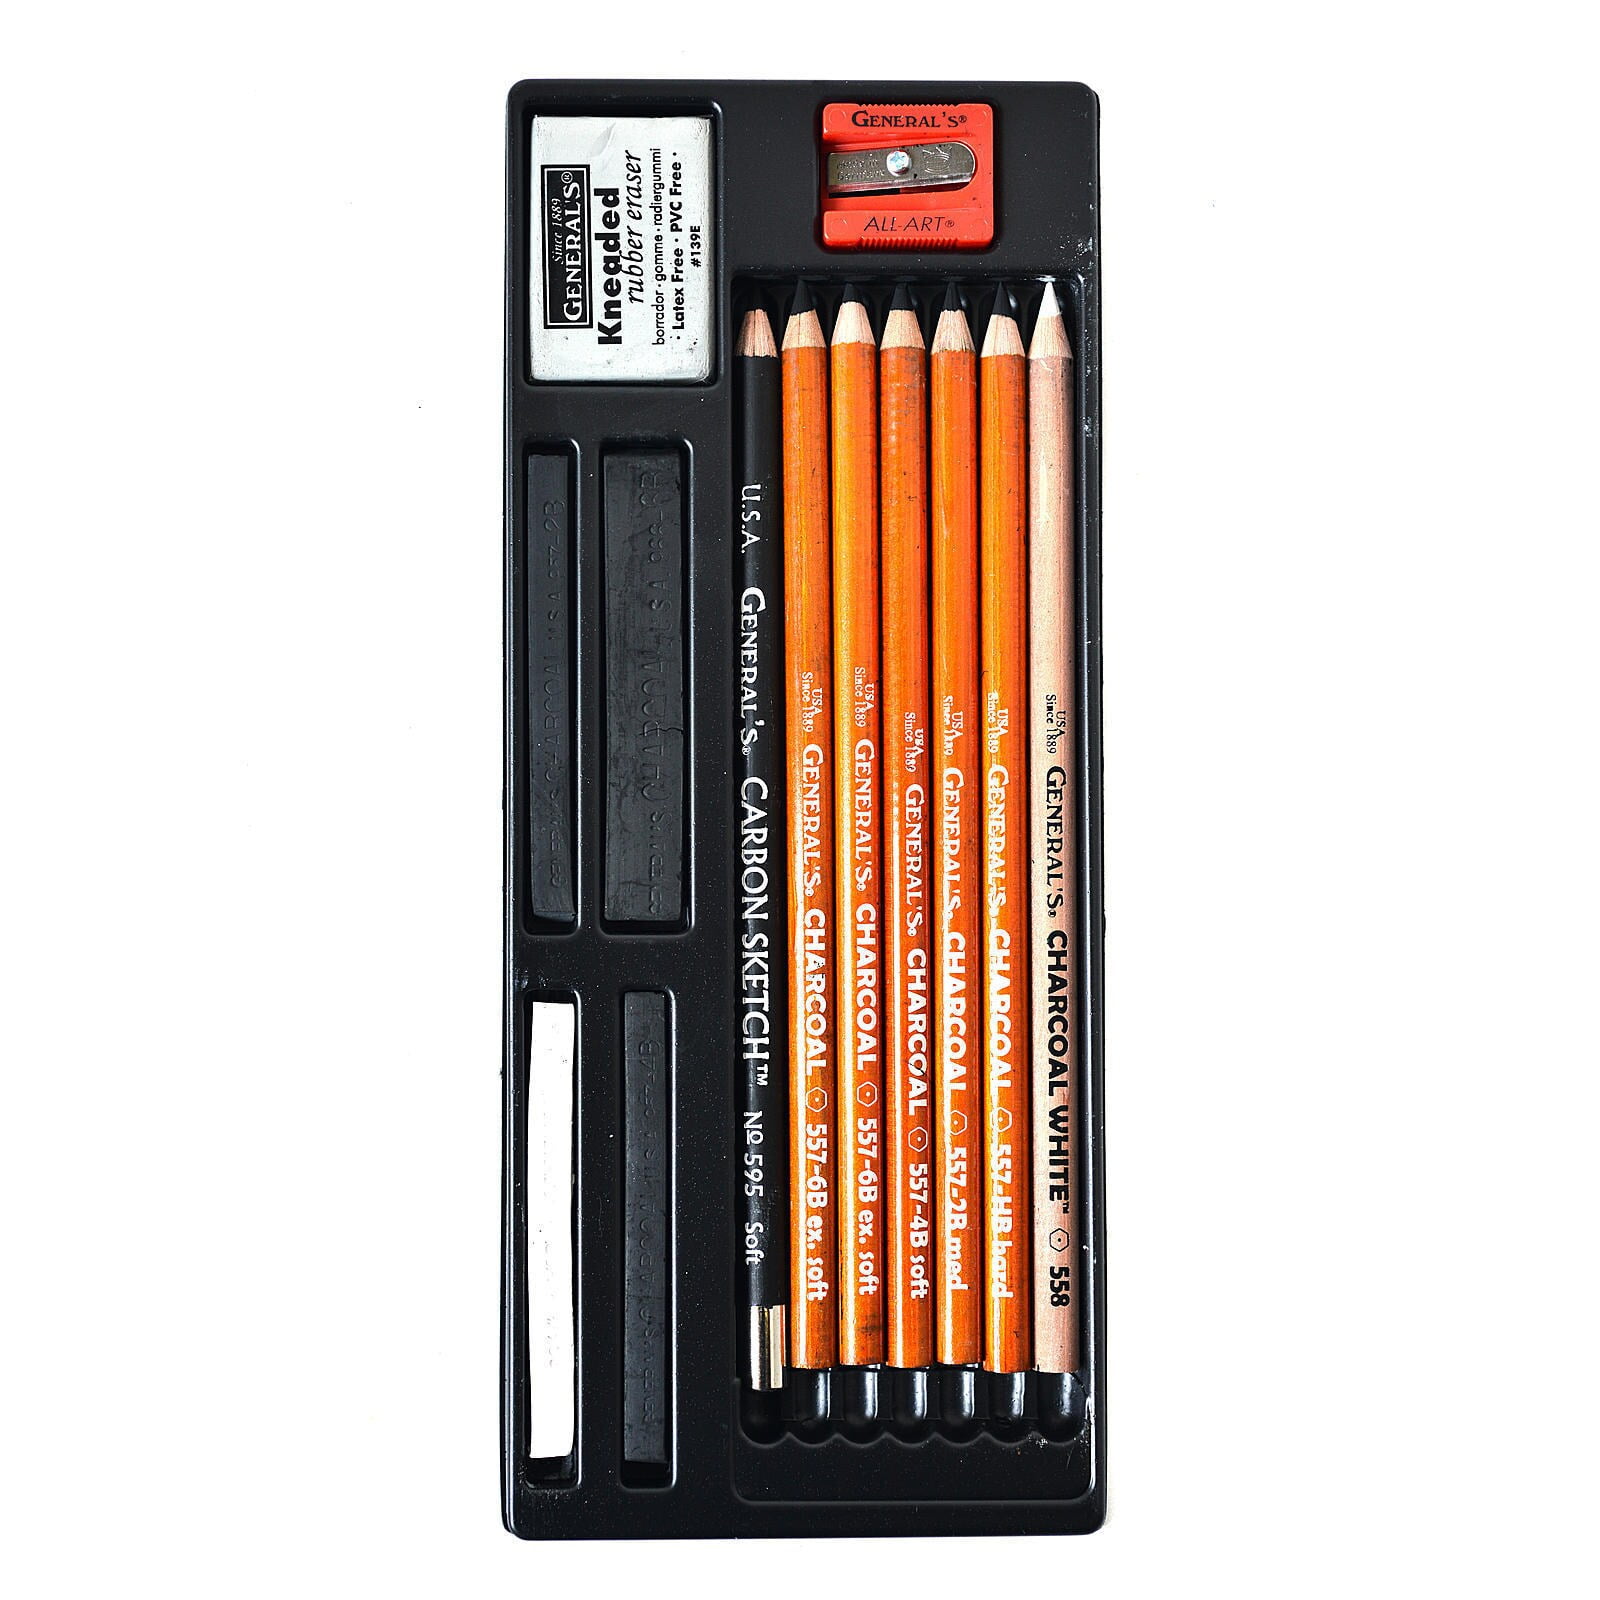 General's The Original Charcoal Assorted Grades & Generals Charcoal White  - Sitaram Stationers